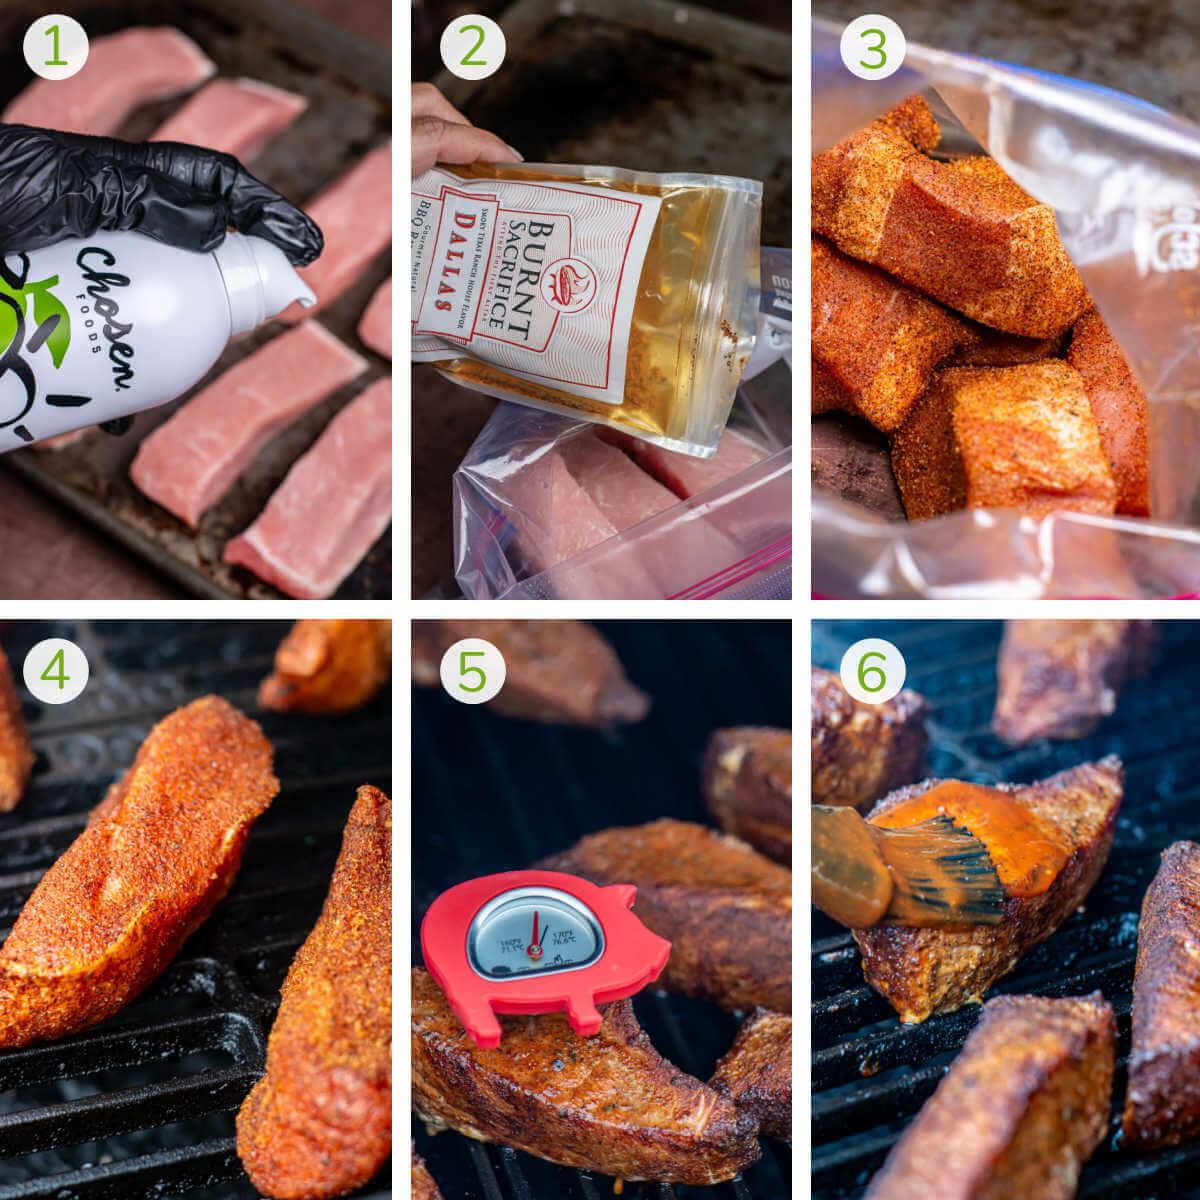 six process photos showing spraying the ribs with cooking oil, seasoning, smoking and then brushing with a BBQ sauce.